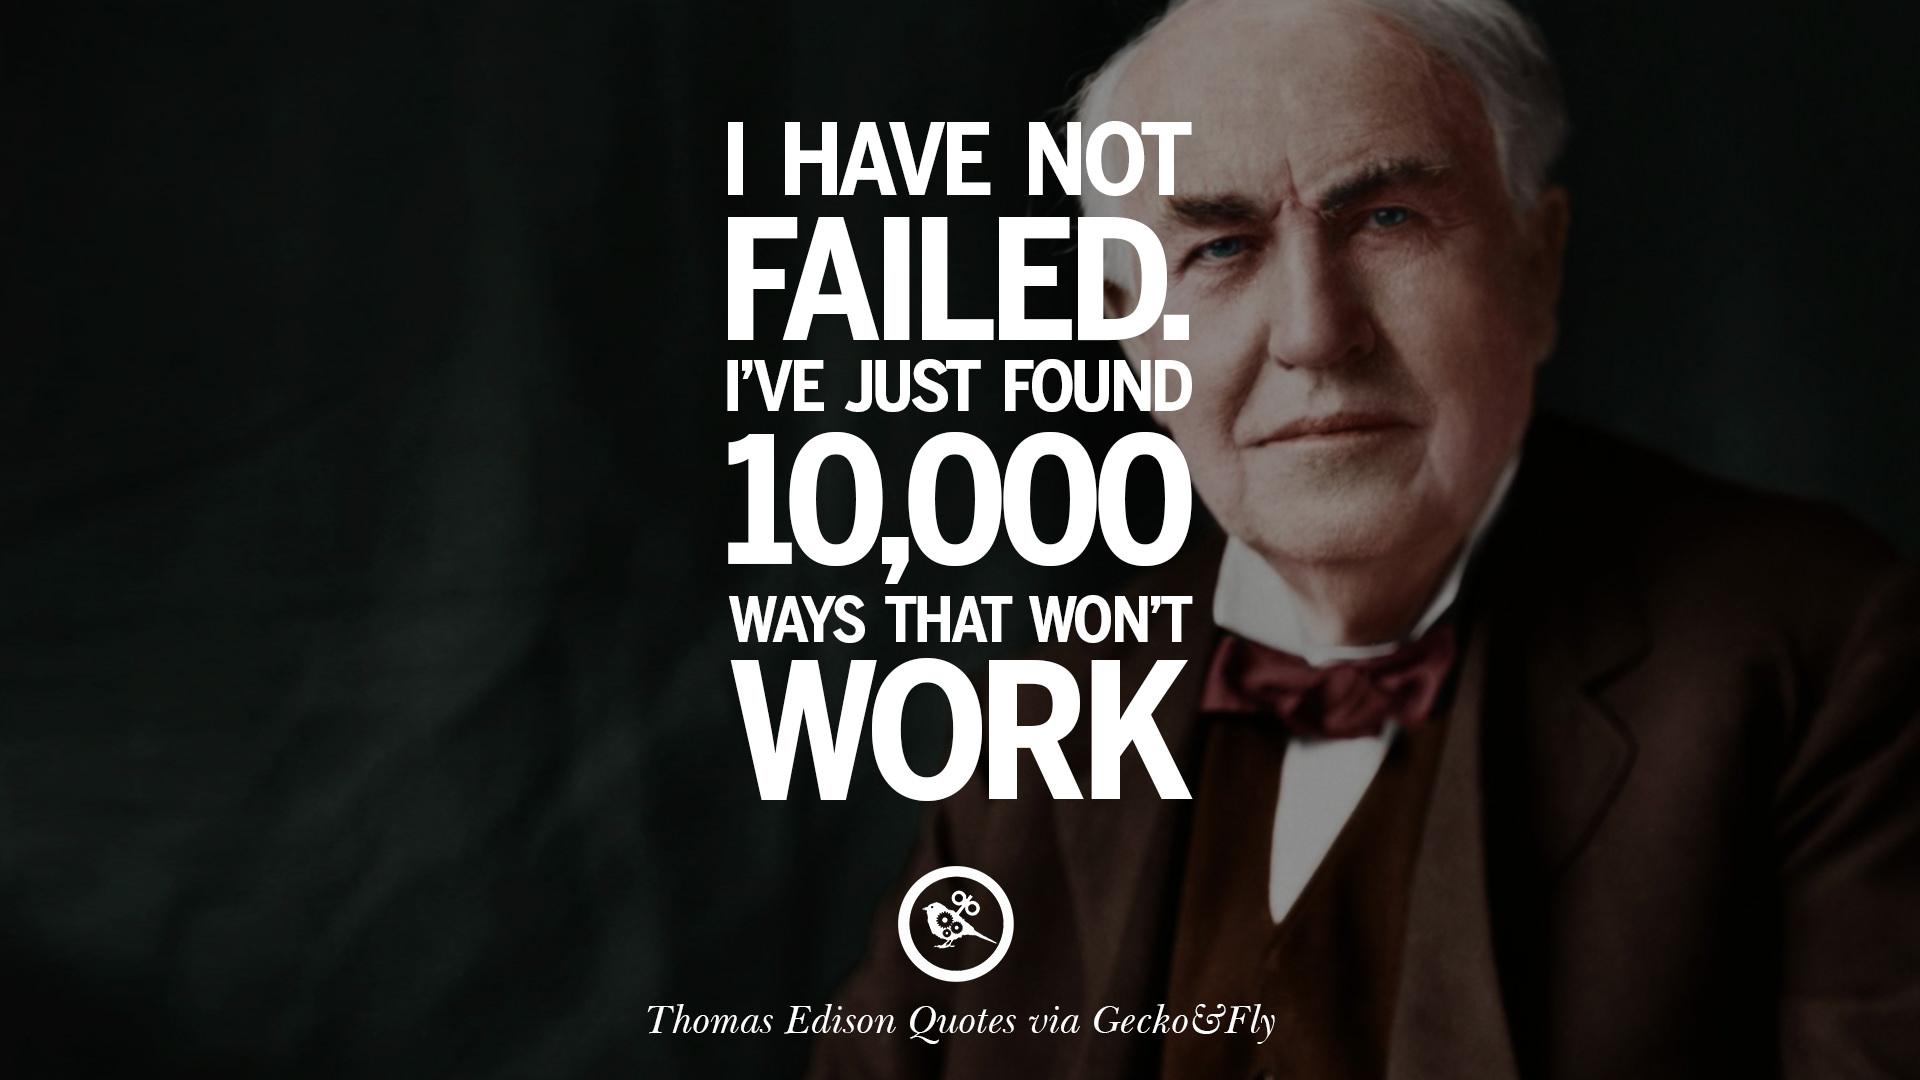 Empowering Quotes By Thomas Edison On Hard Work And Success